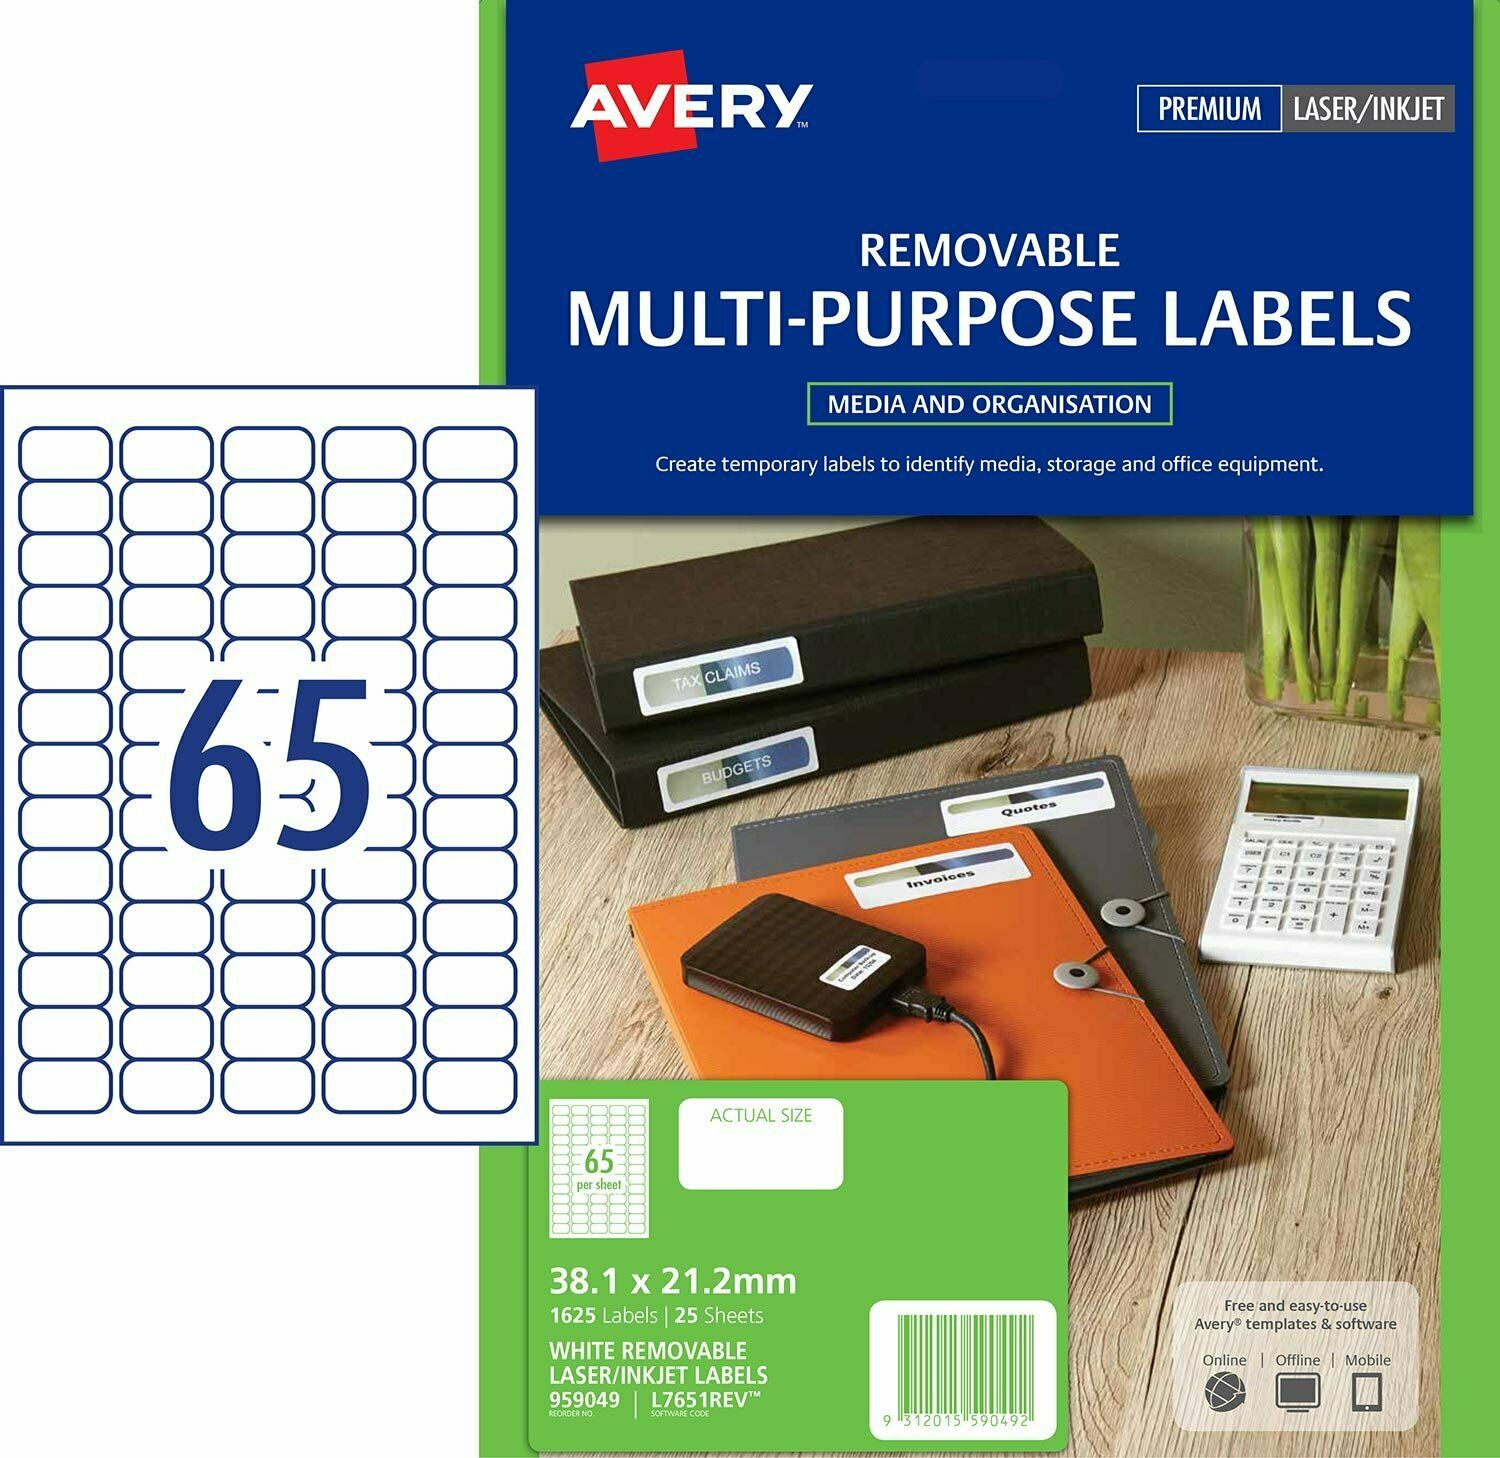 Avery 959049 L7651Rev Laser Labels Removable 65 Per Sheet For Label Template 65 Per Sheet